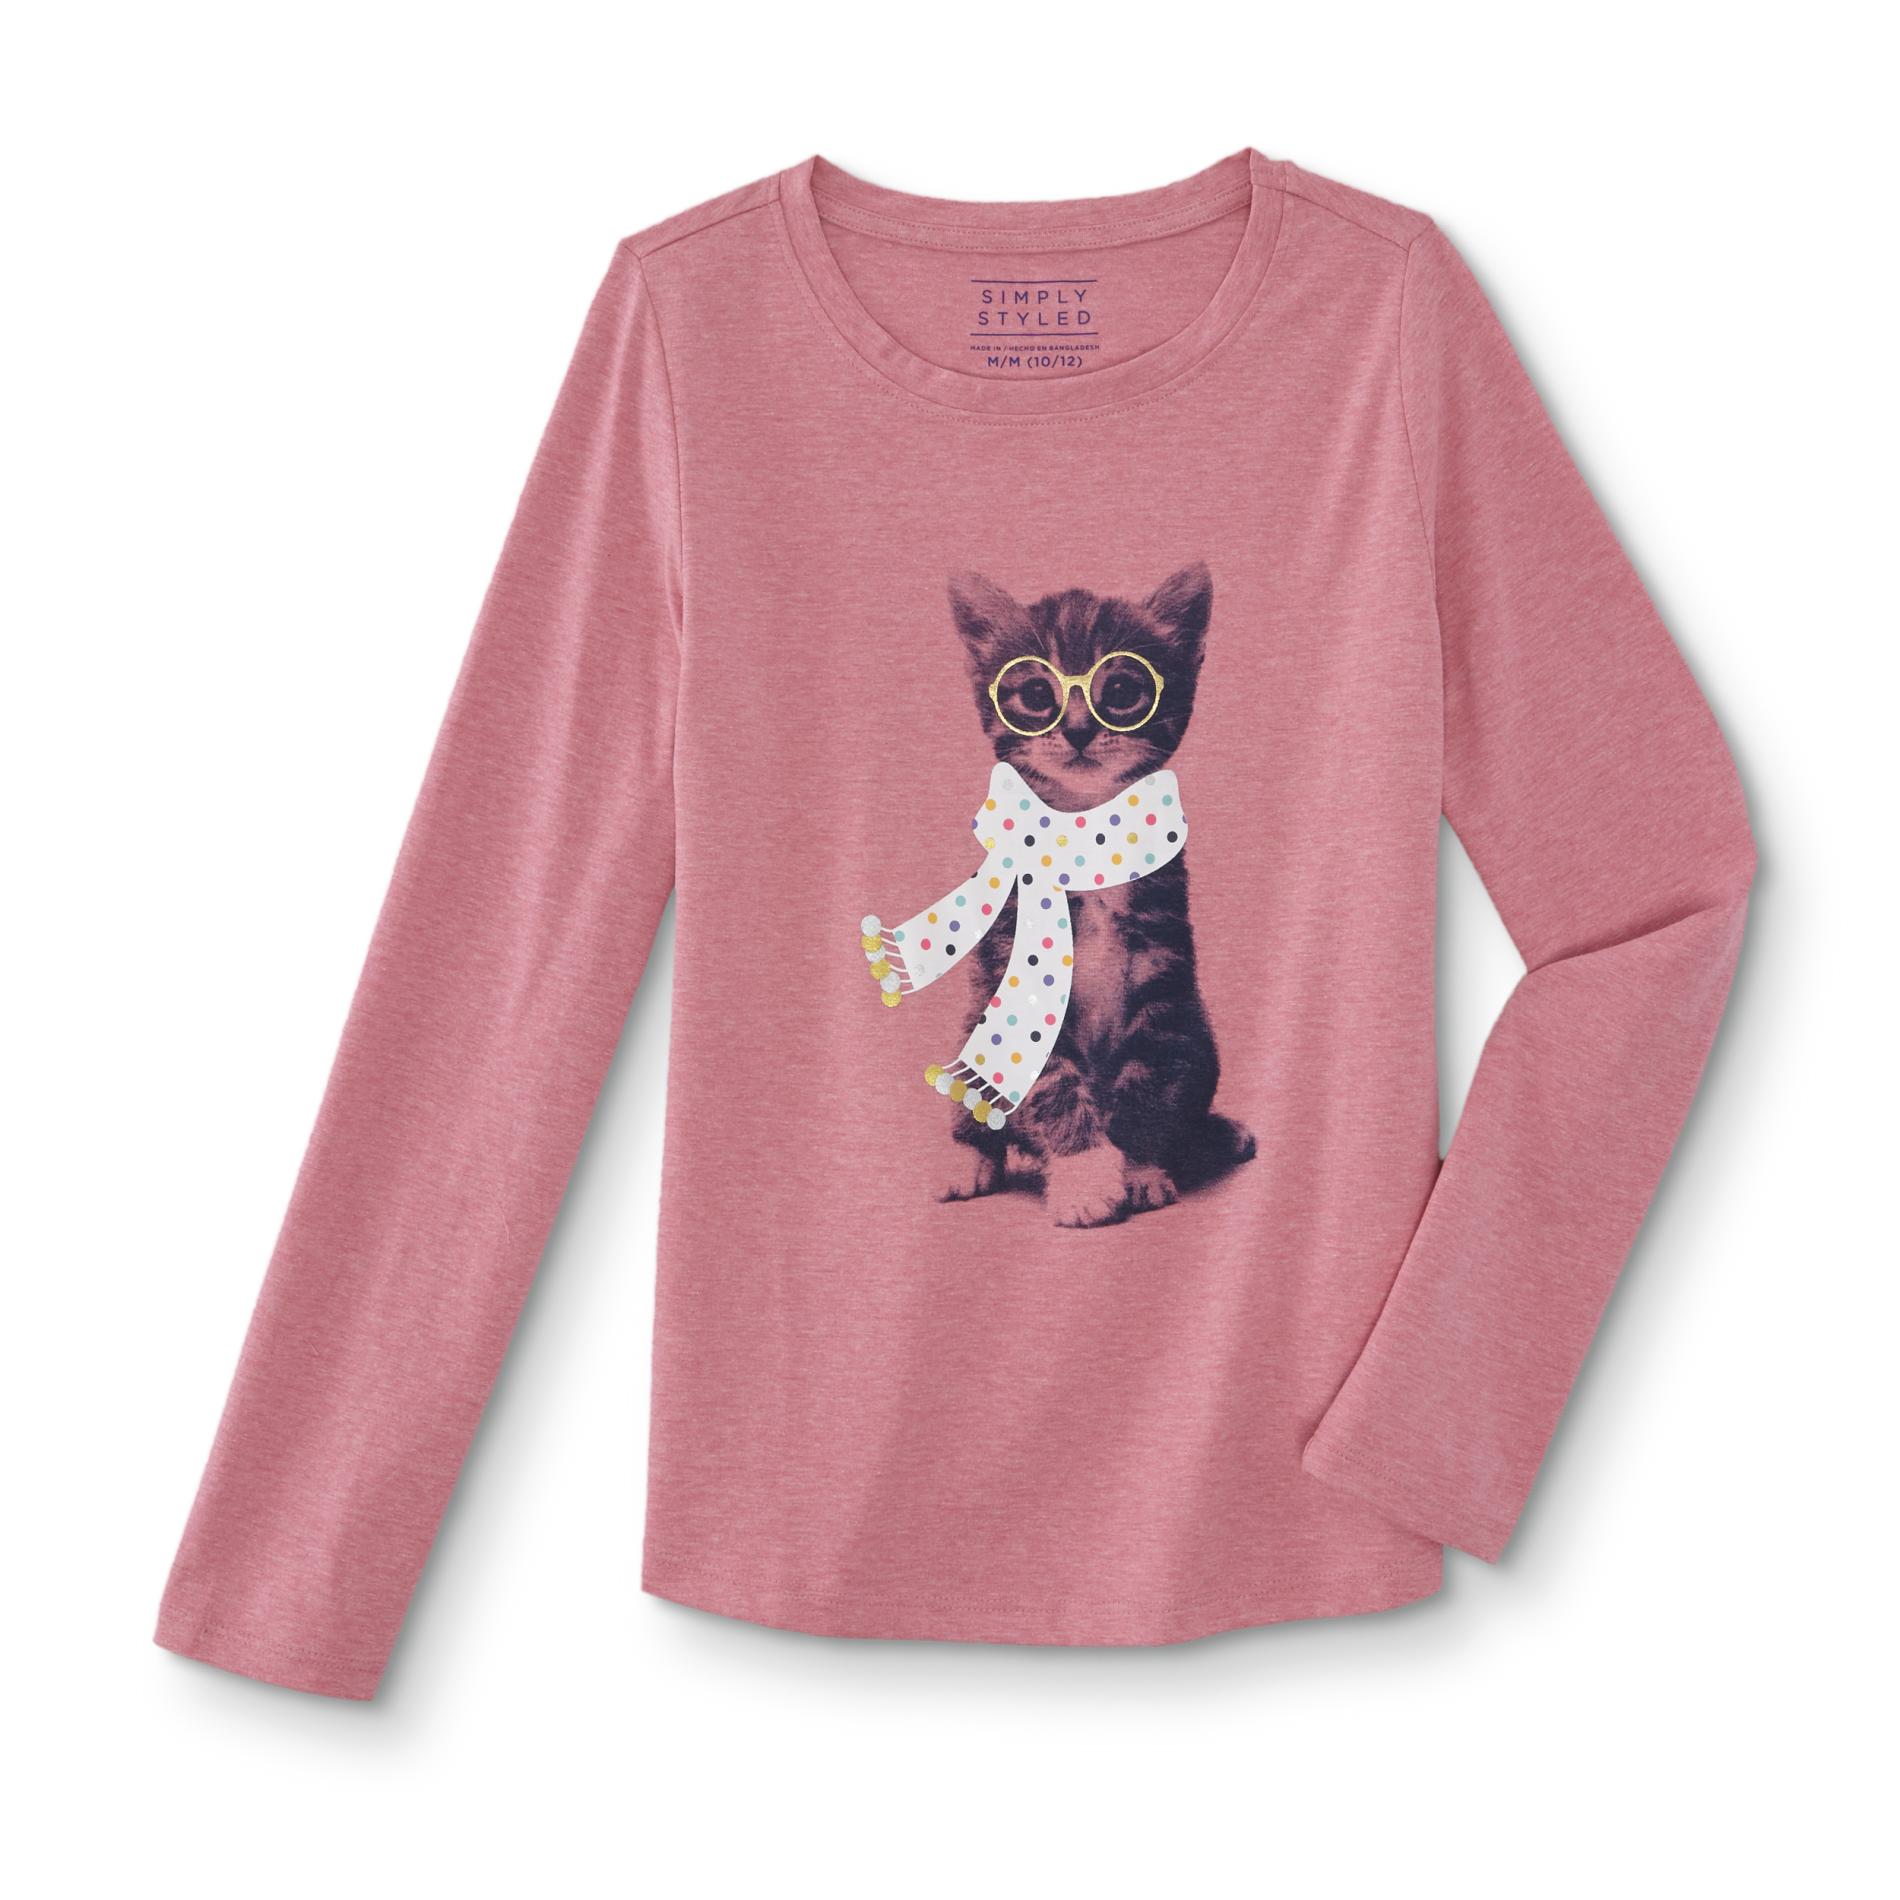 Simply Styled Girls' Graphic Shirt - Scarf Kitten